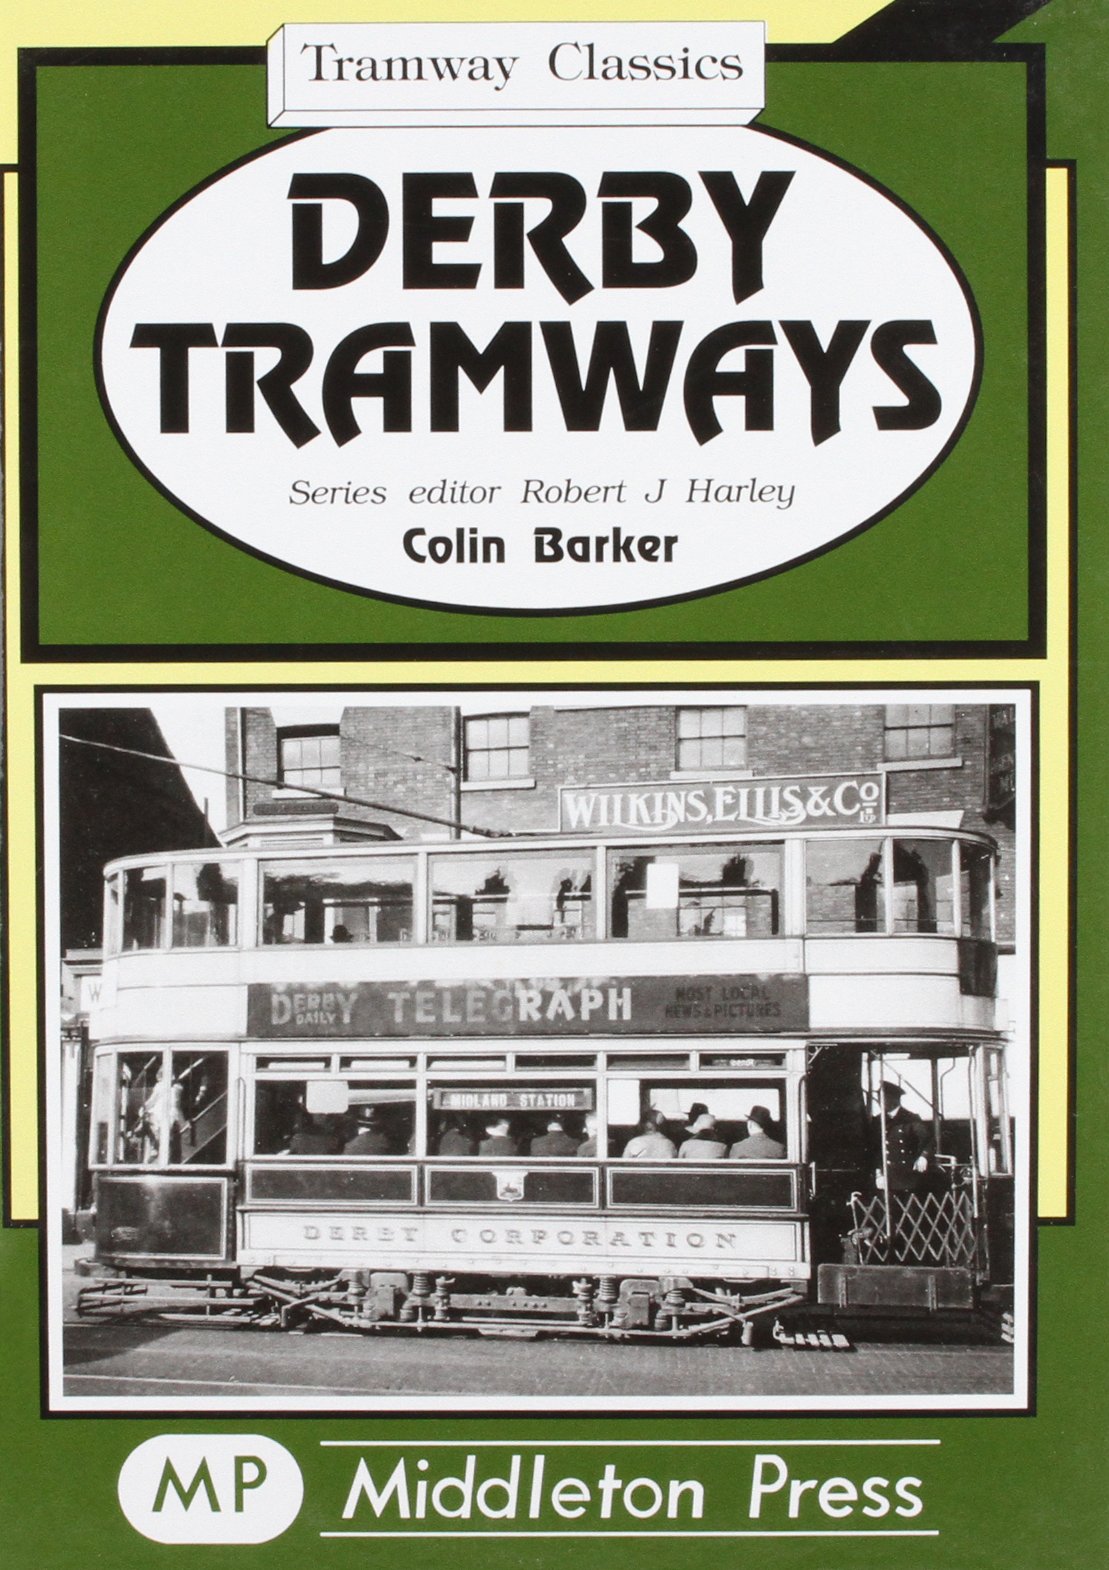 Tramway Classics Derby Tramways A comprehensive city system